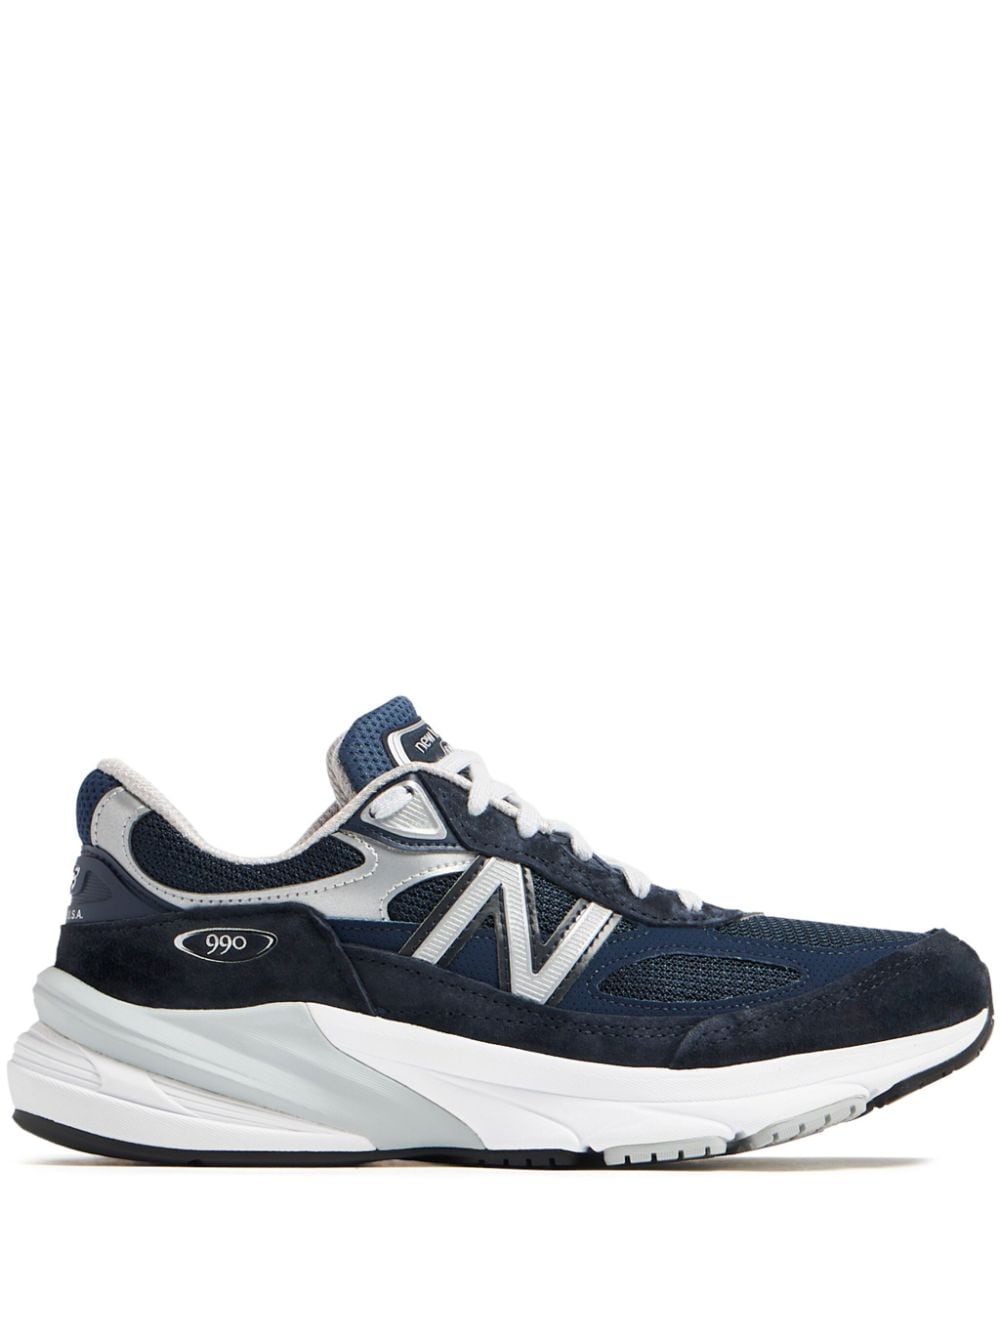 New Balance 990v6 low-top sneakers - Blue von New Balance